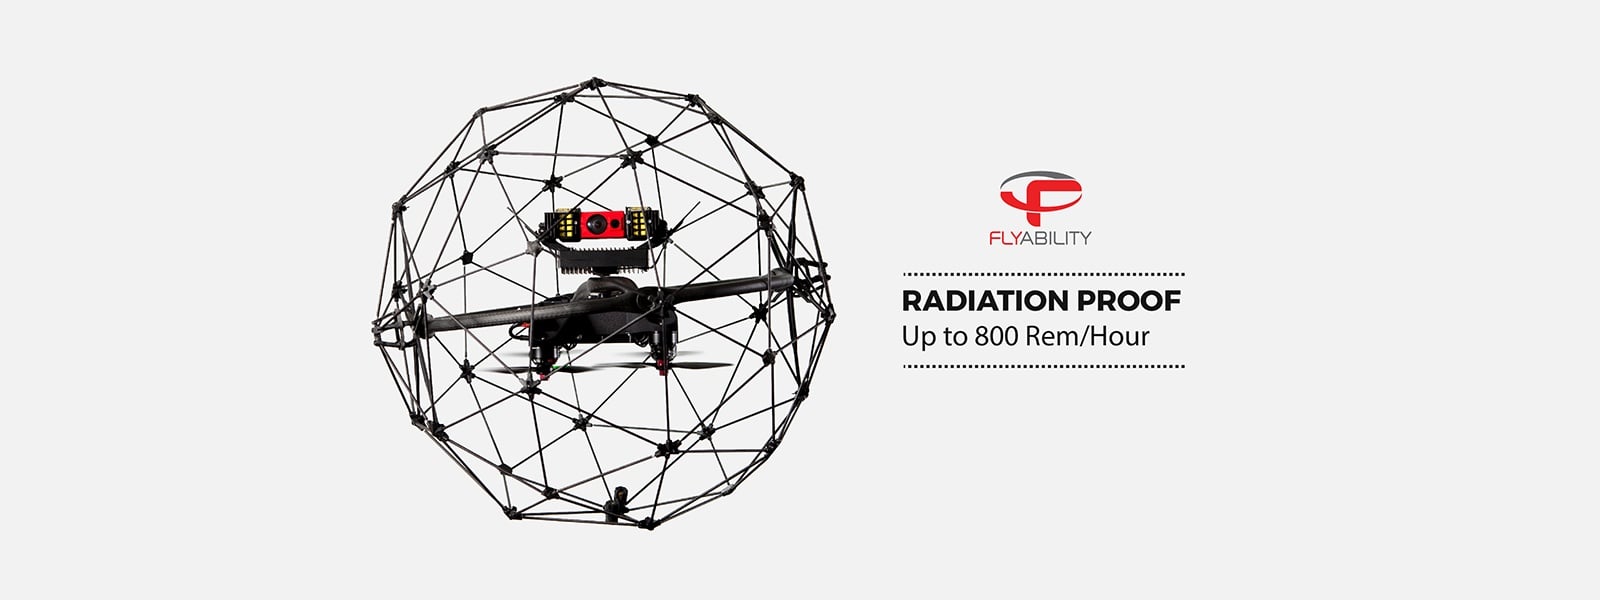 The Elios drone tested to 800 R/H of radiation to increase nuclear safety